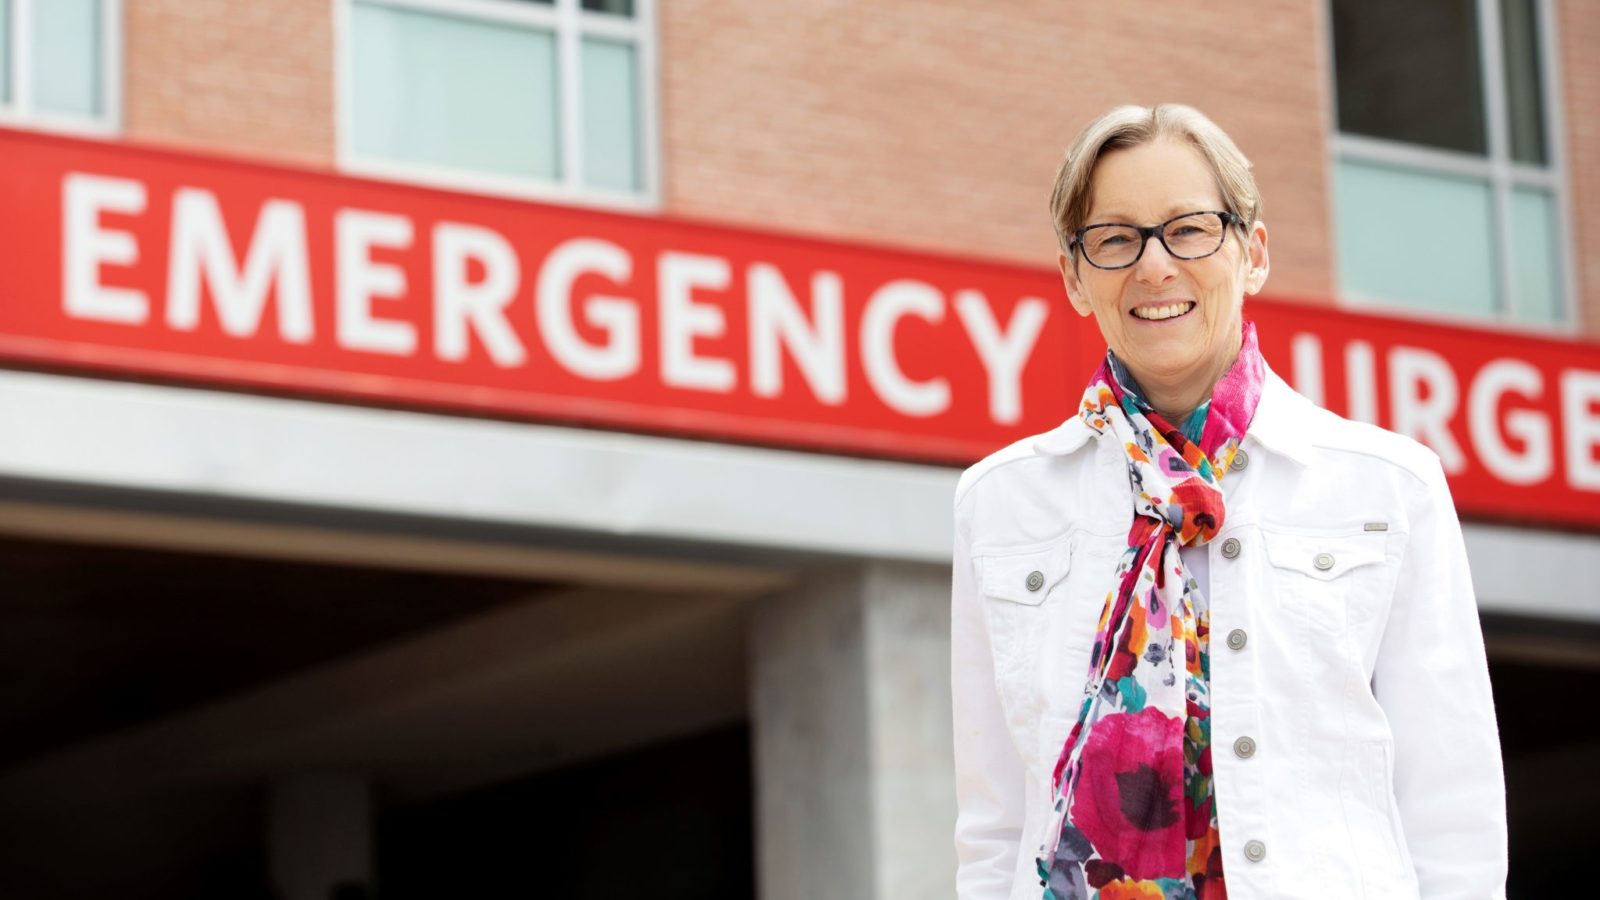 Karen Henkenhaf, wearing a floral scarf and white denim jacket, stands outside the RVH emergency sign and smiles for a photo